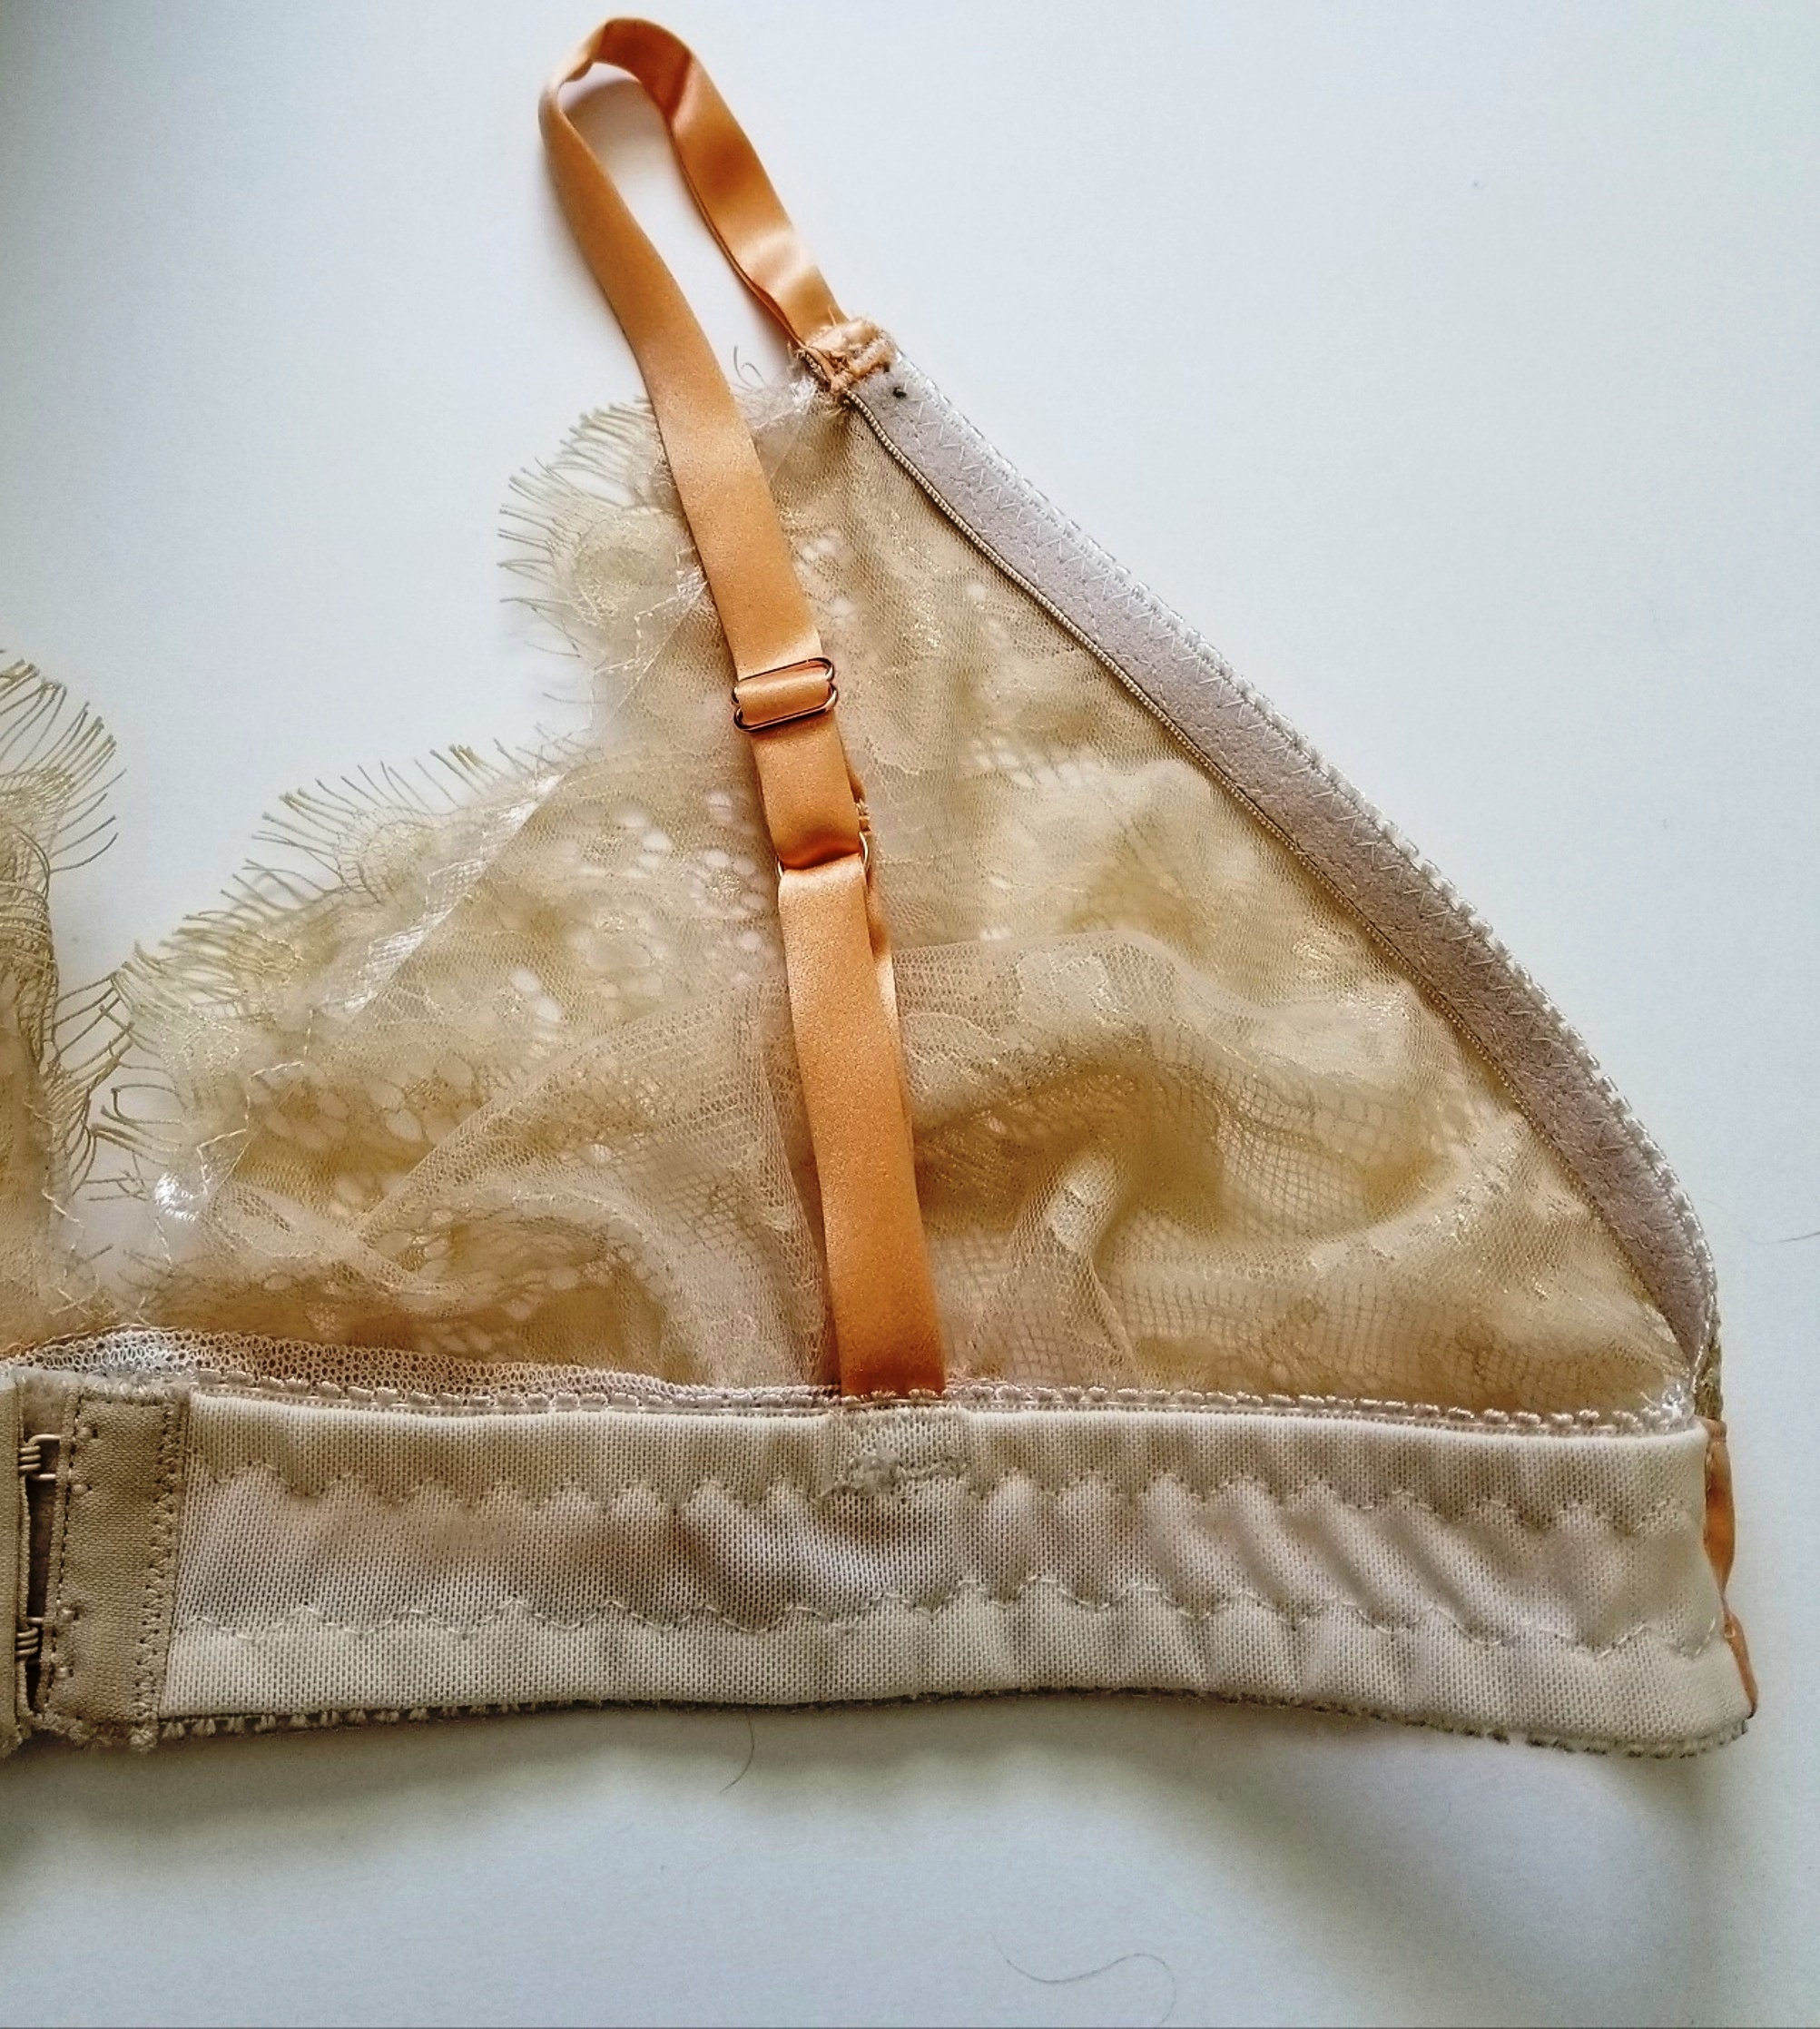 Vintage inspired apricot and ecru silk satin and French lace | Etsy